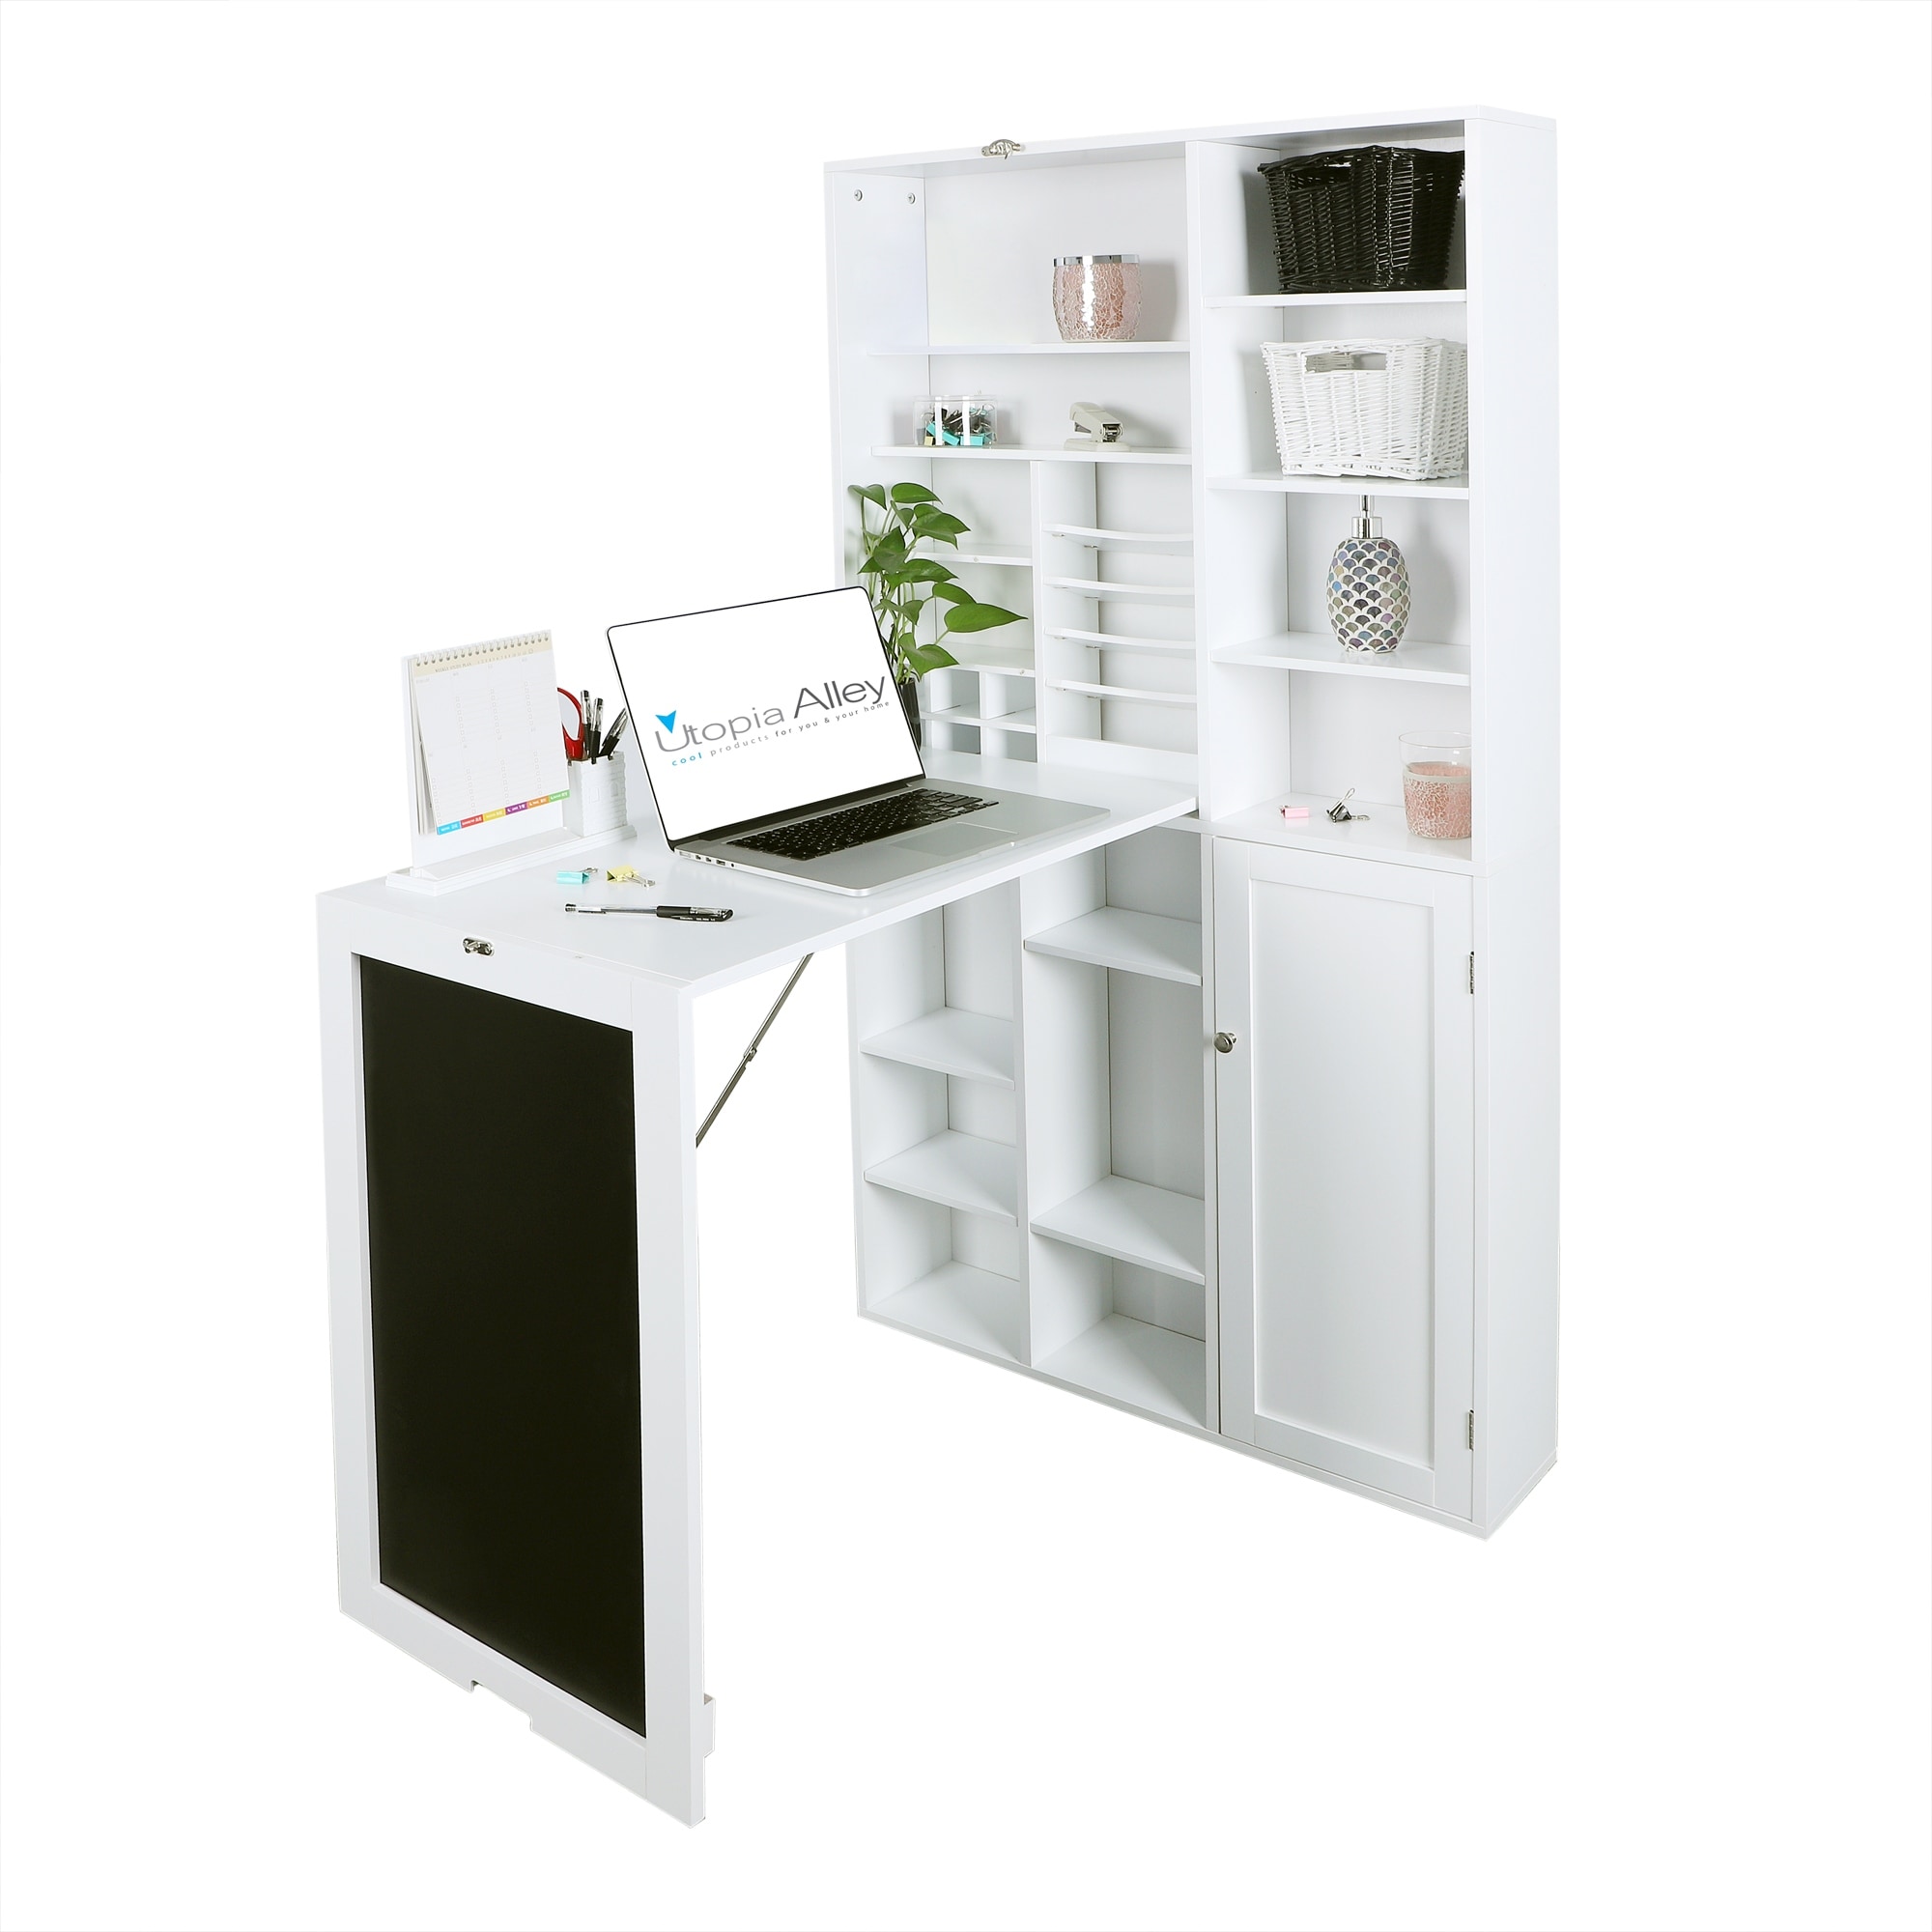 https://ak1.ostkcdn.com/images/products/is/images/direct/6384f2c64b3add323cb238bc187d0c4ab010e743/Utopia-Alley-Fold-Out-Convertible-Desk-with-Large-Storage-Cabinet%2C-Shelves-%26-Chalkboard%2C-Multi-Function-Computer-Desk%2C-White.jpg